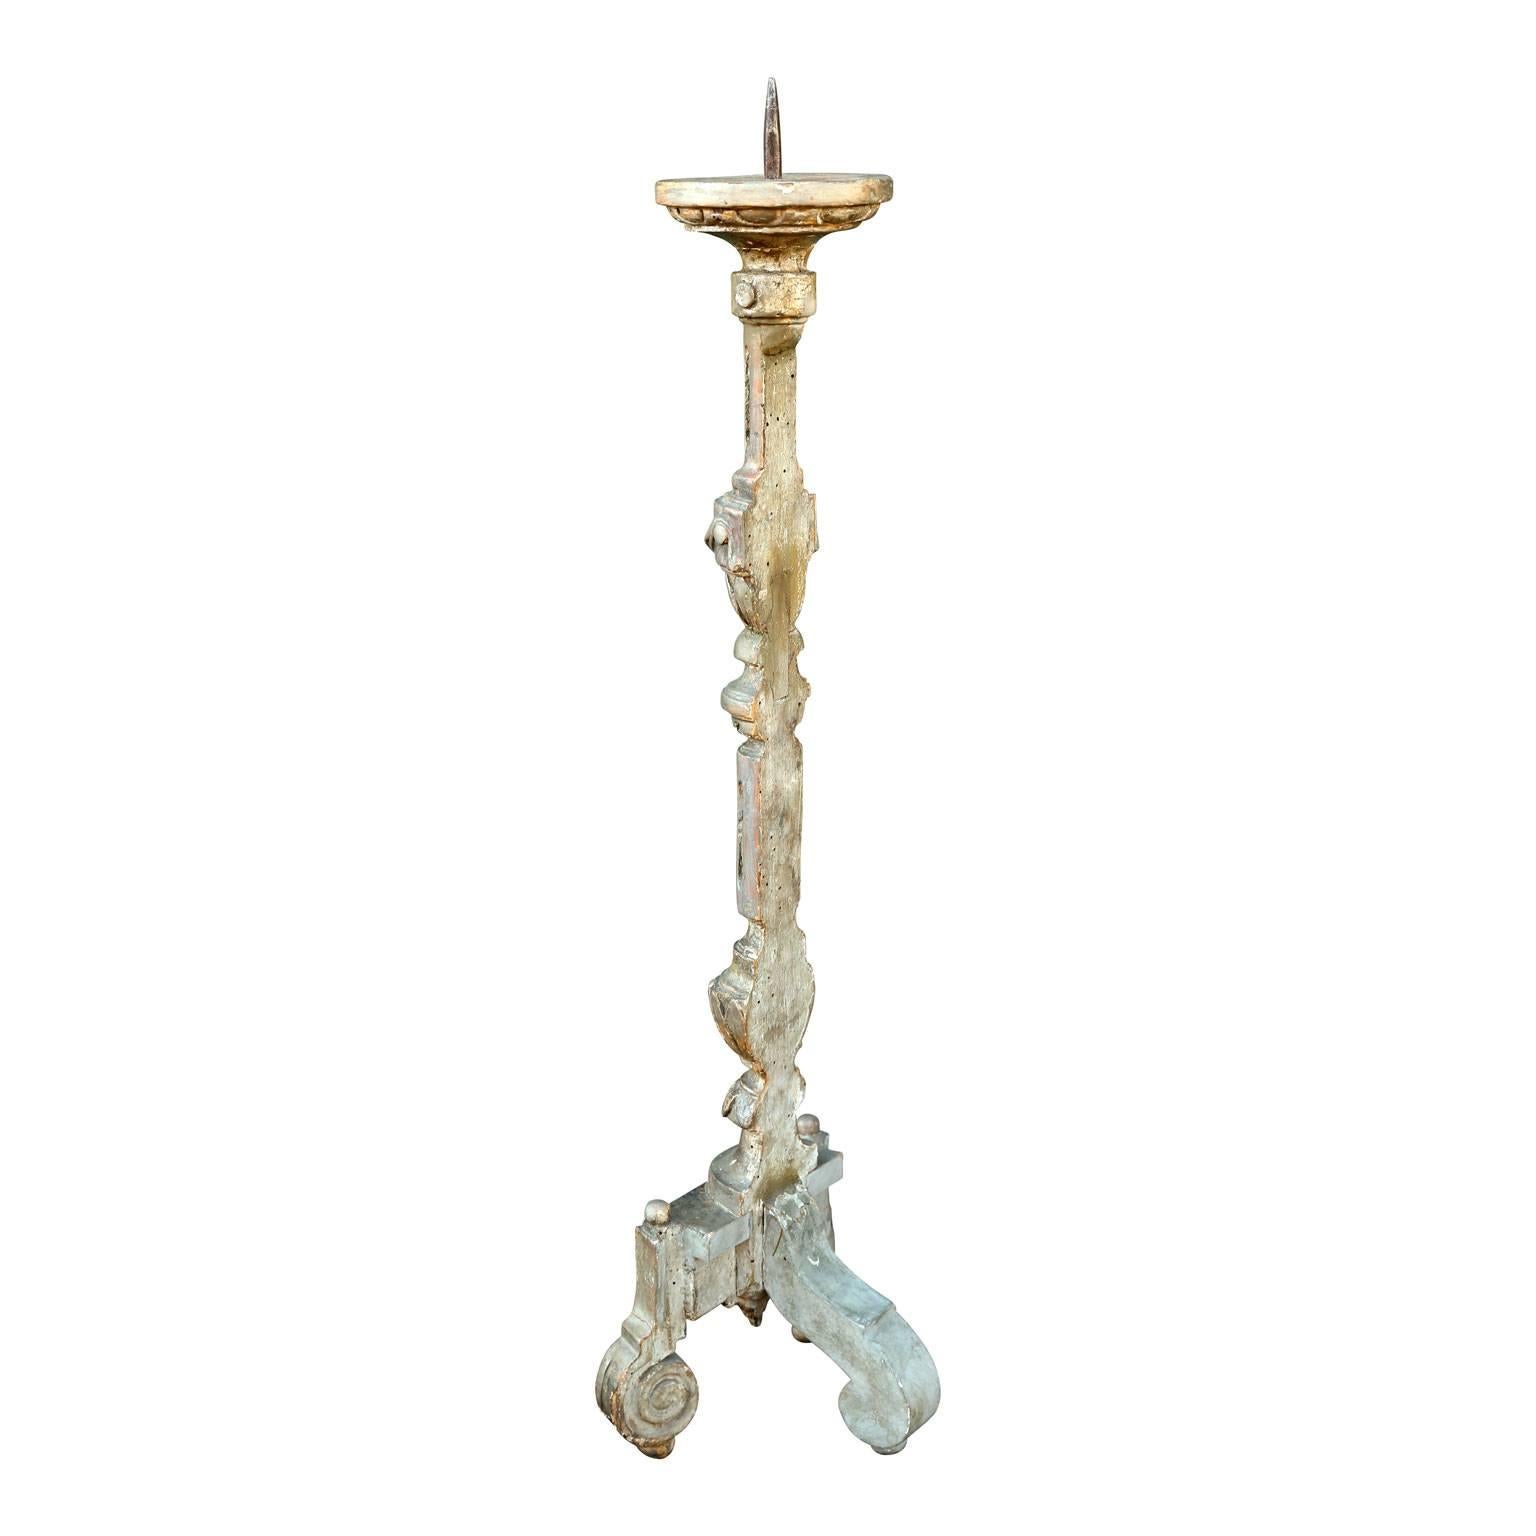 Louis XVI Early 19th Century French Bore Doré Candlestick